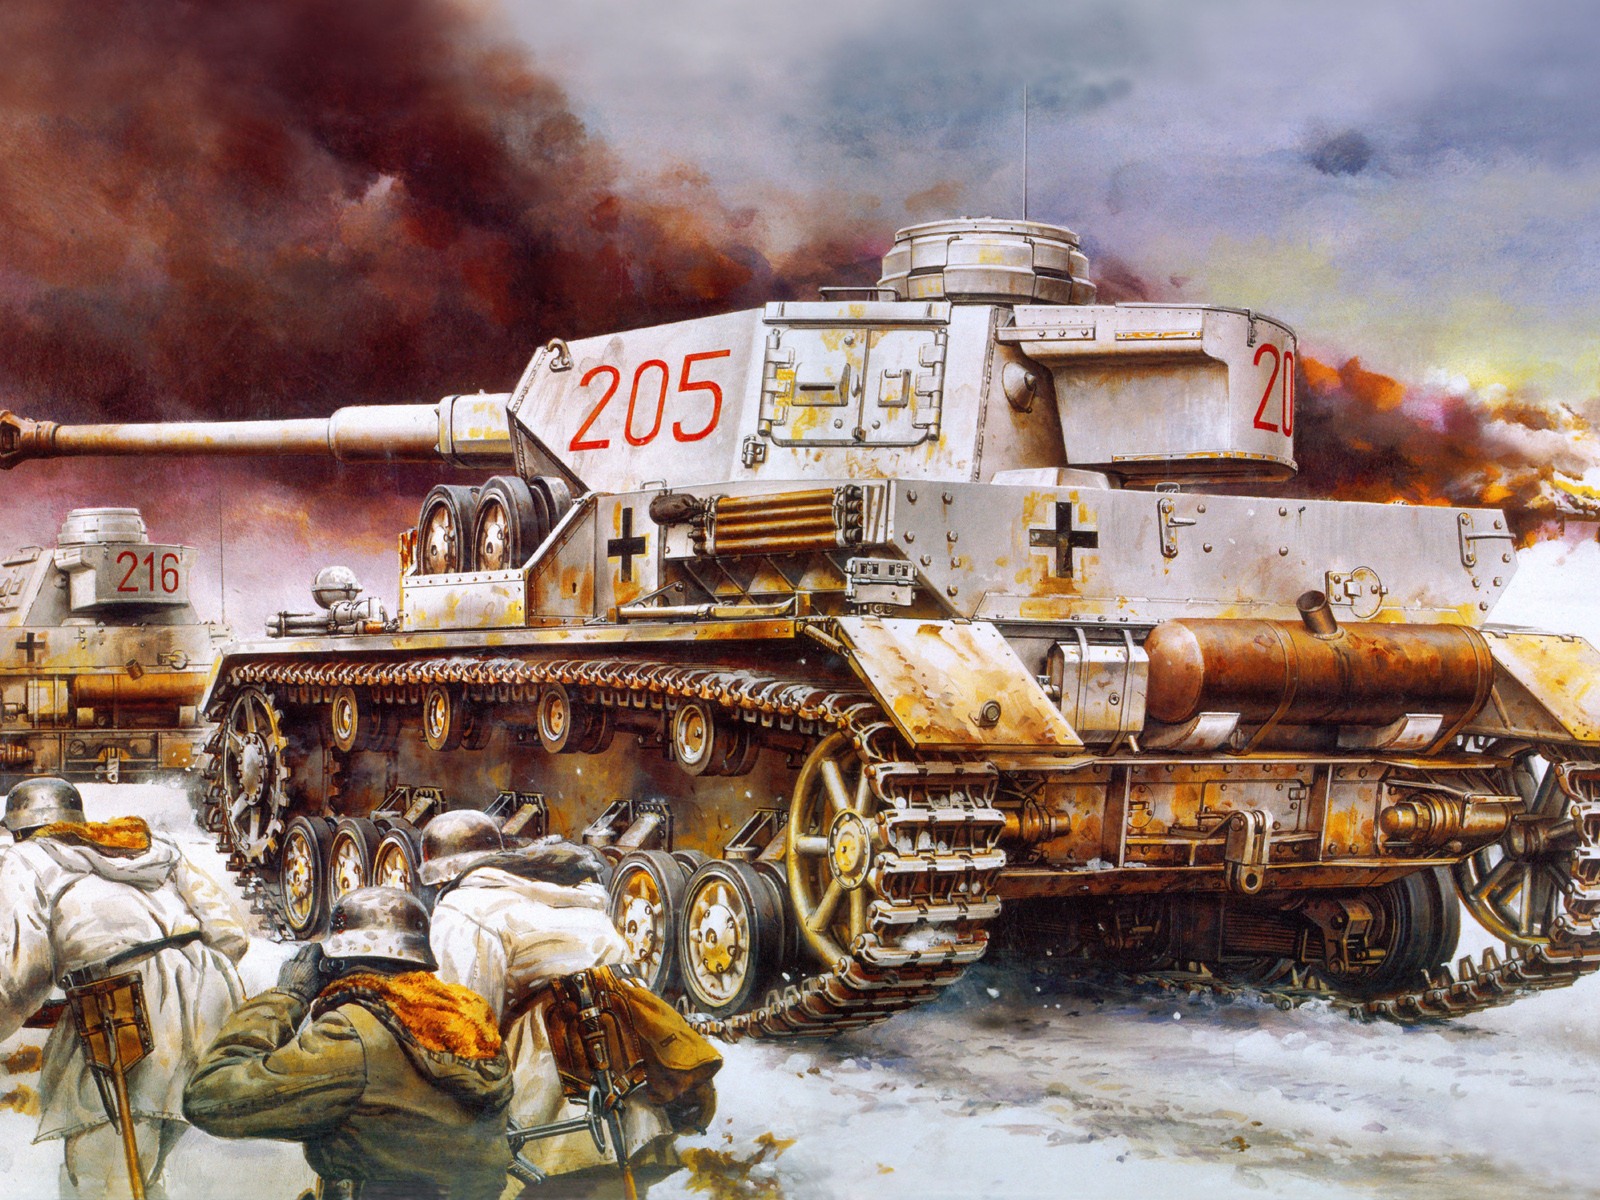 Military tanks, armored HD painting wallpapers #15 - 1600x1200